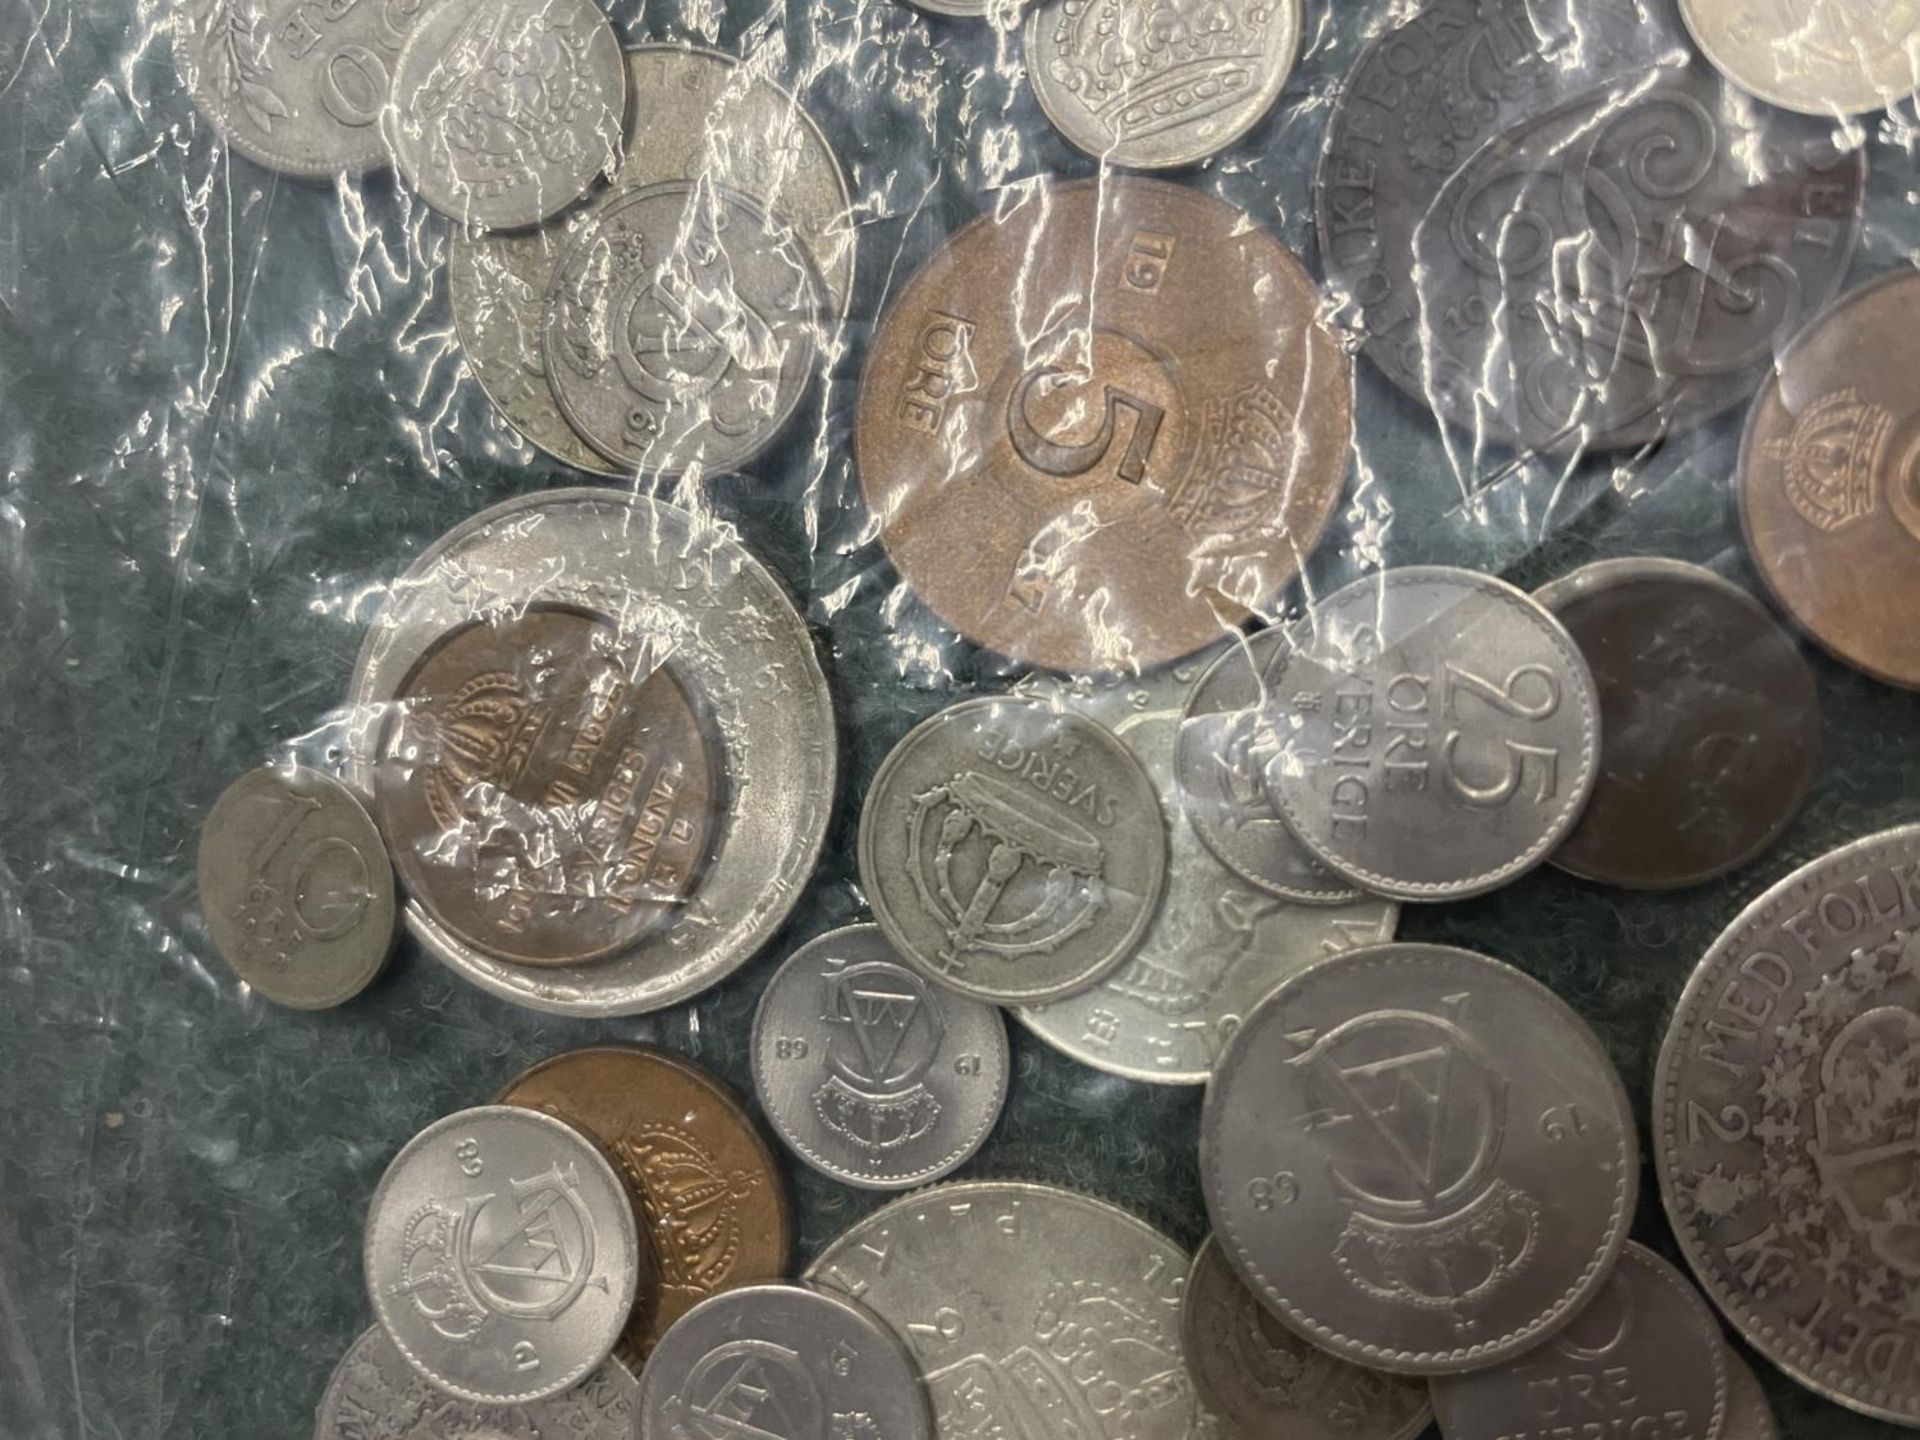 A LARGE QUANTITY OF SWEDISH COINS WITH BELIEVED SILVER CONTENT 75 GRAMS - Image 3 of 6